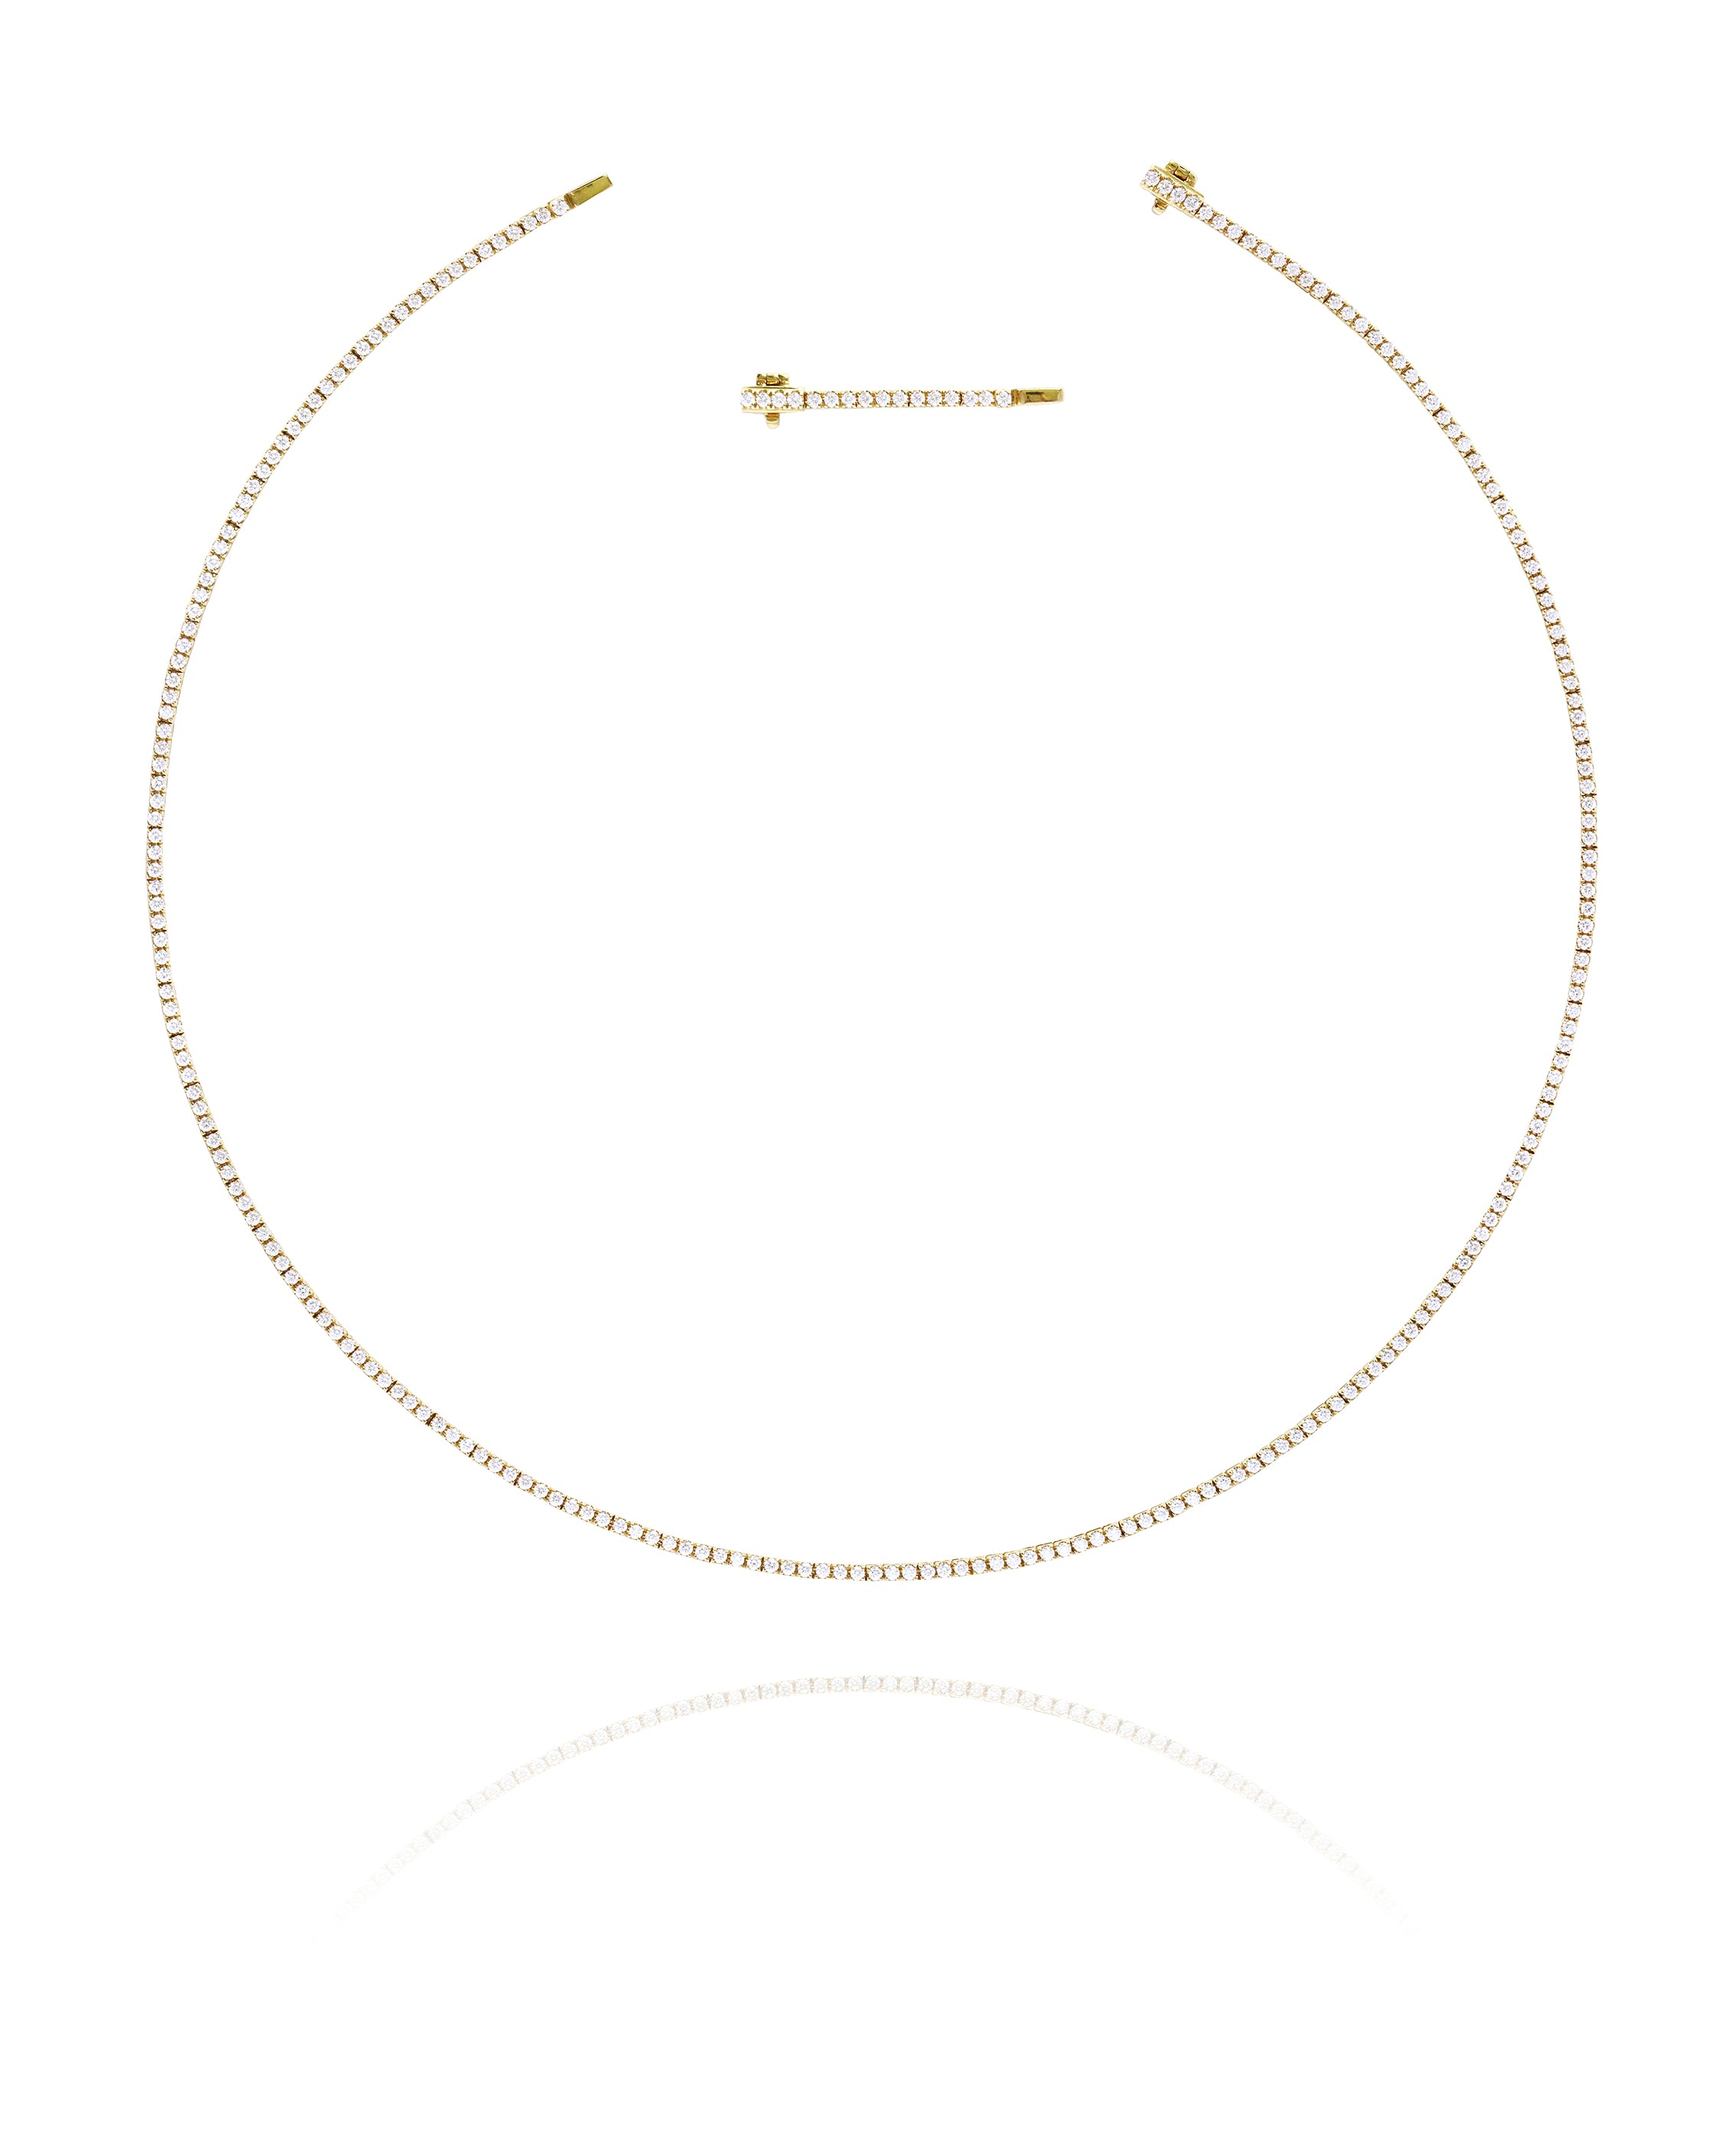 Fine Diamond Line Necklace in White/Rose/Yellow Gold